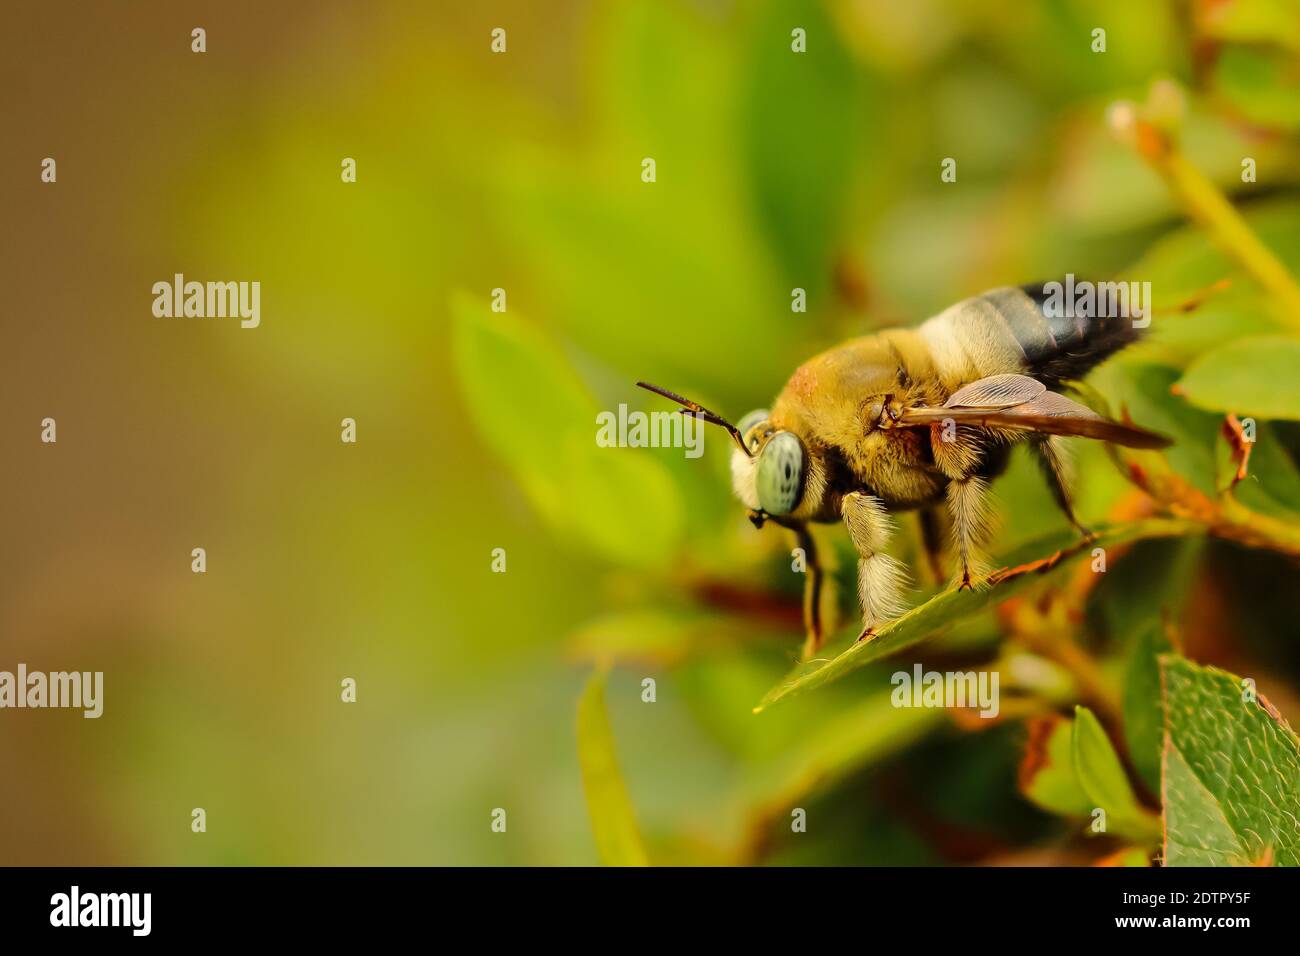 Macro Selective focus image of a single honey bee siting on green leaves with blur background Stock Photo